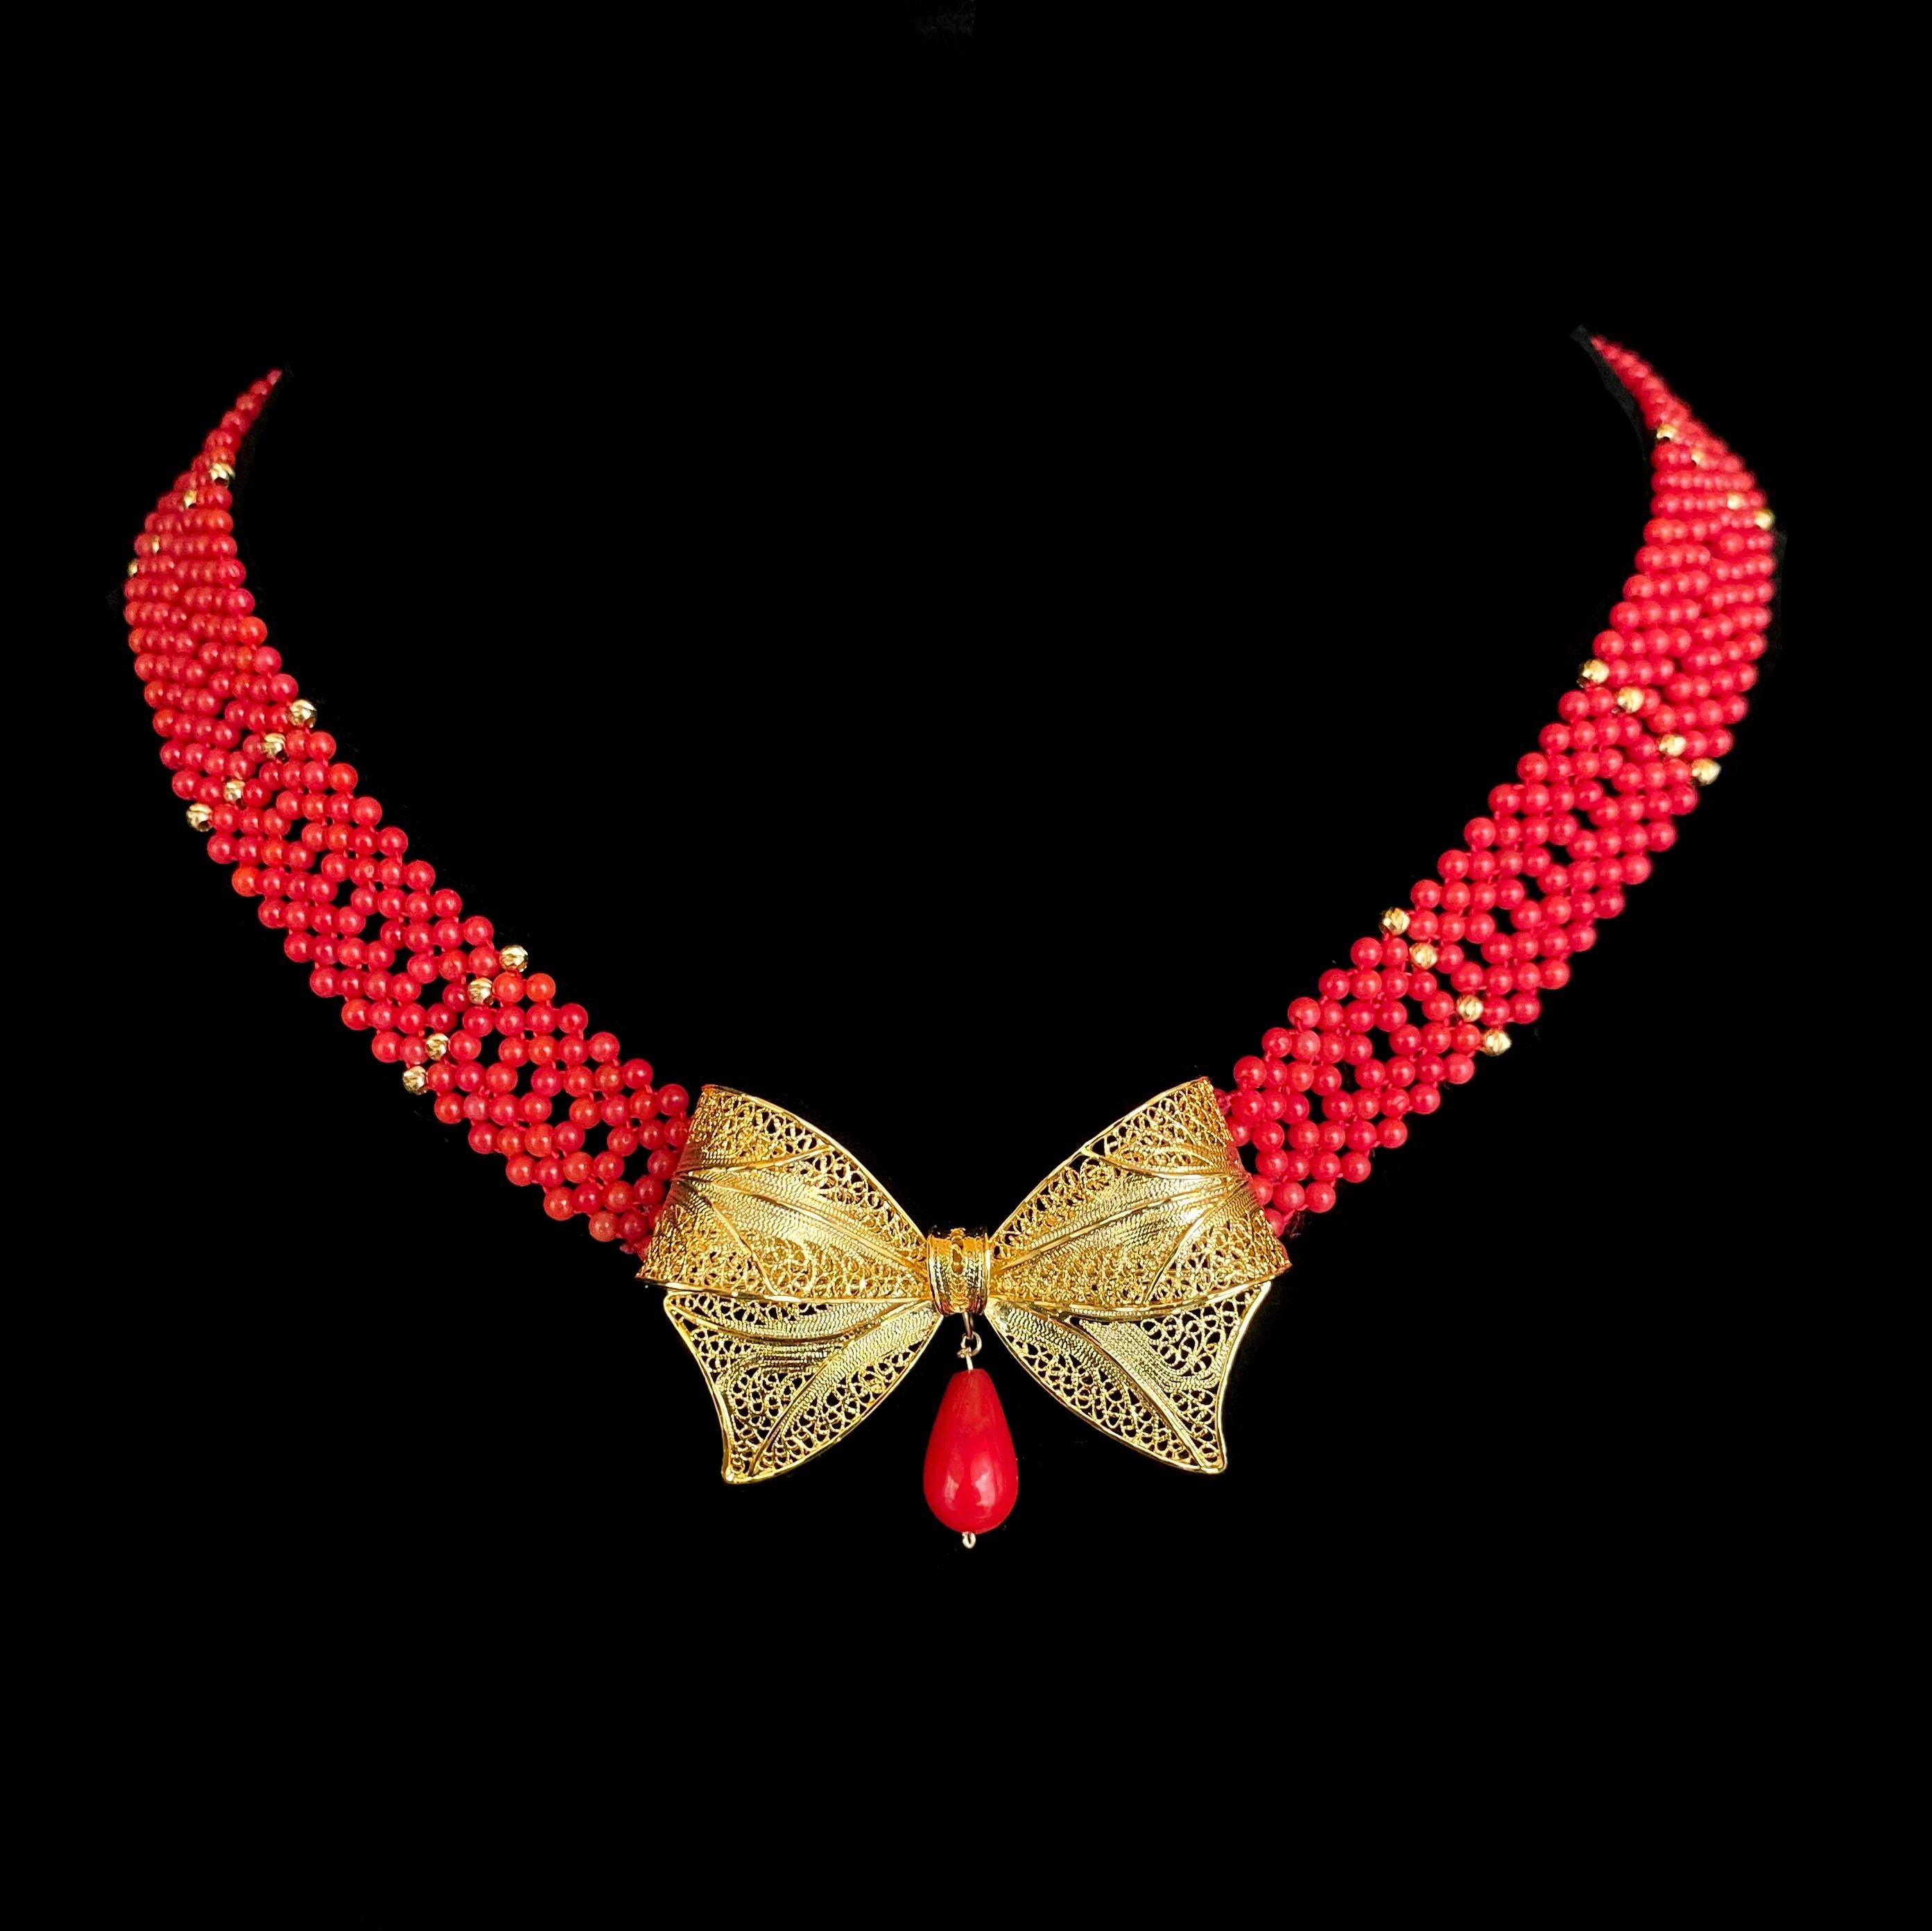 Stunning piece by Marina J. This Necklace is made of Coral beads all intricately woven together into a fine lace like design. The vivid Red Coral is perfectly contrasted by Faceted 18k Yellow Gold Plated adornments that shine magnificently in the